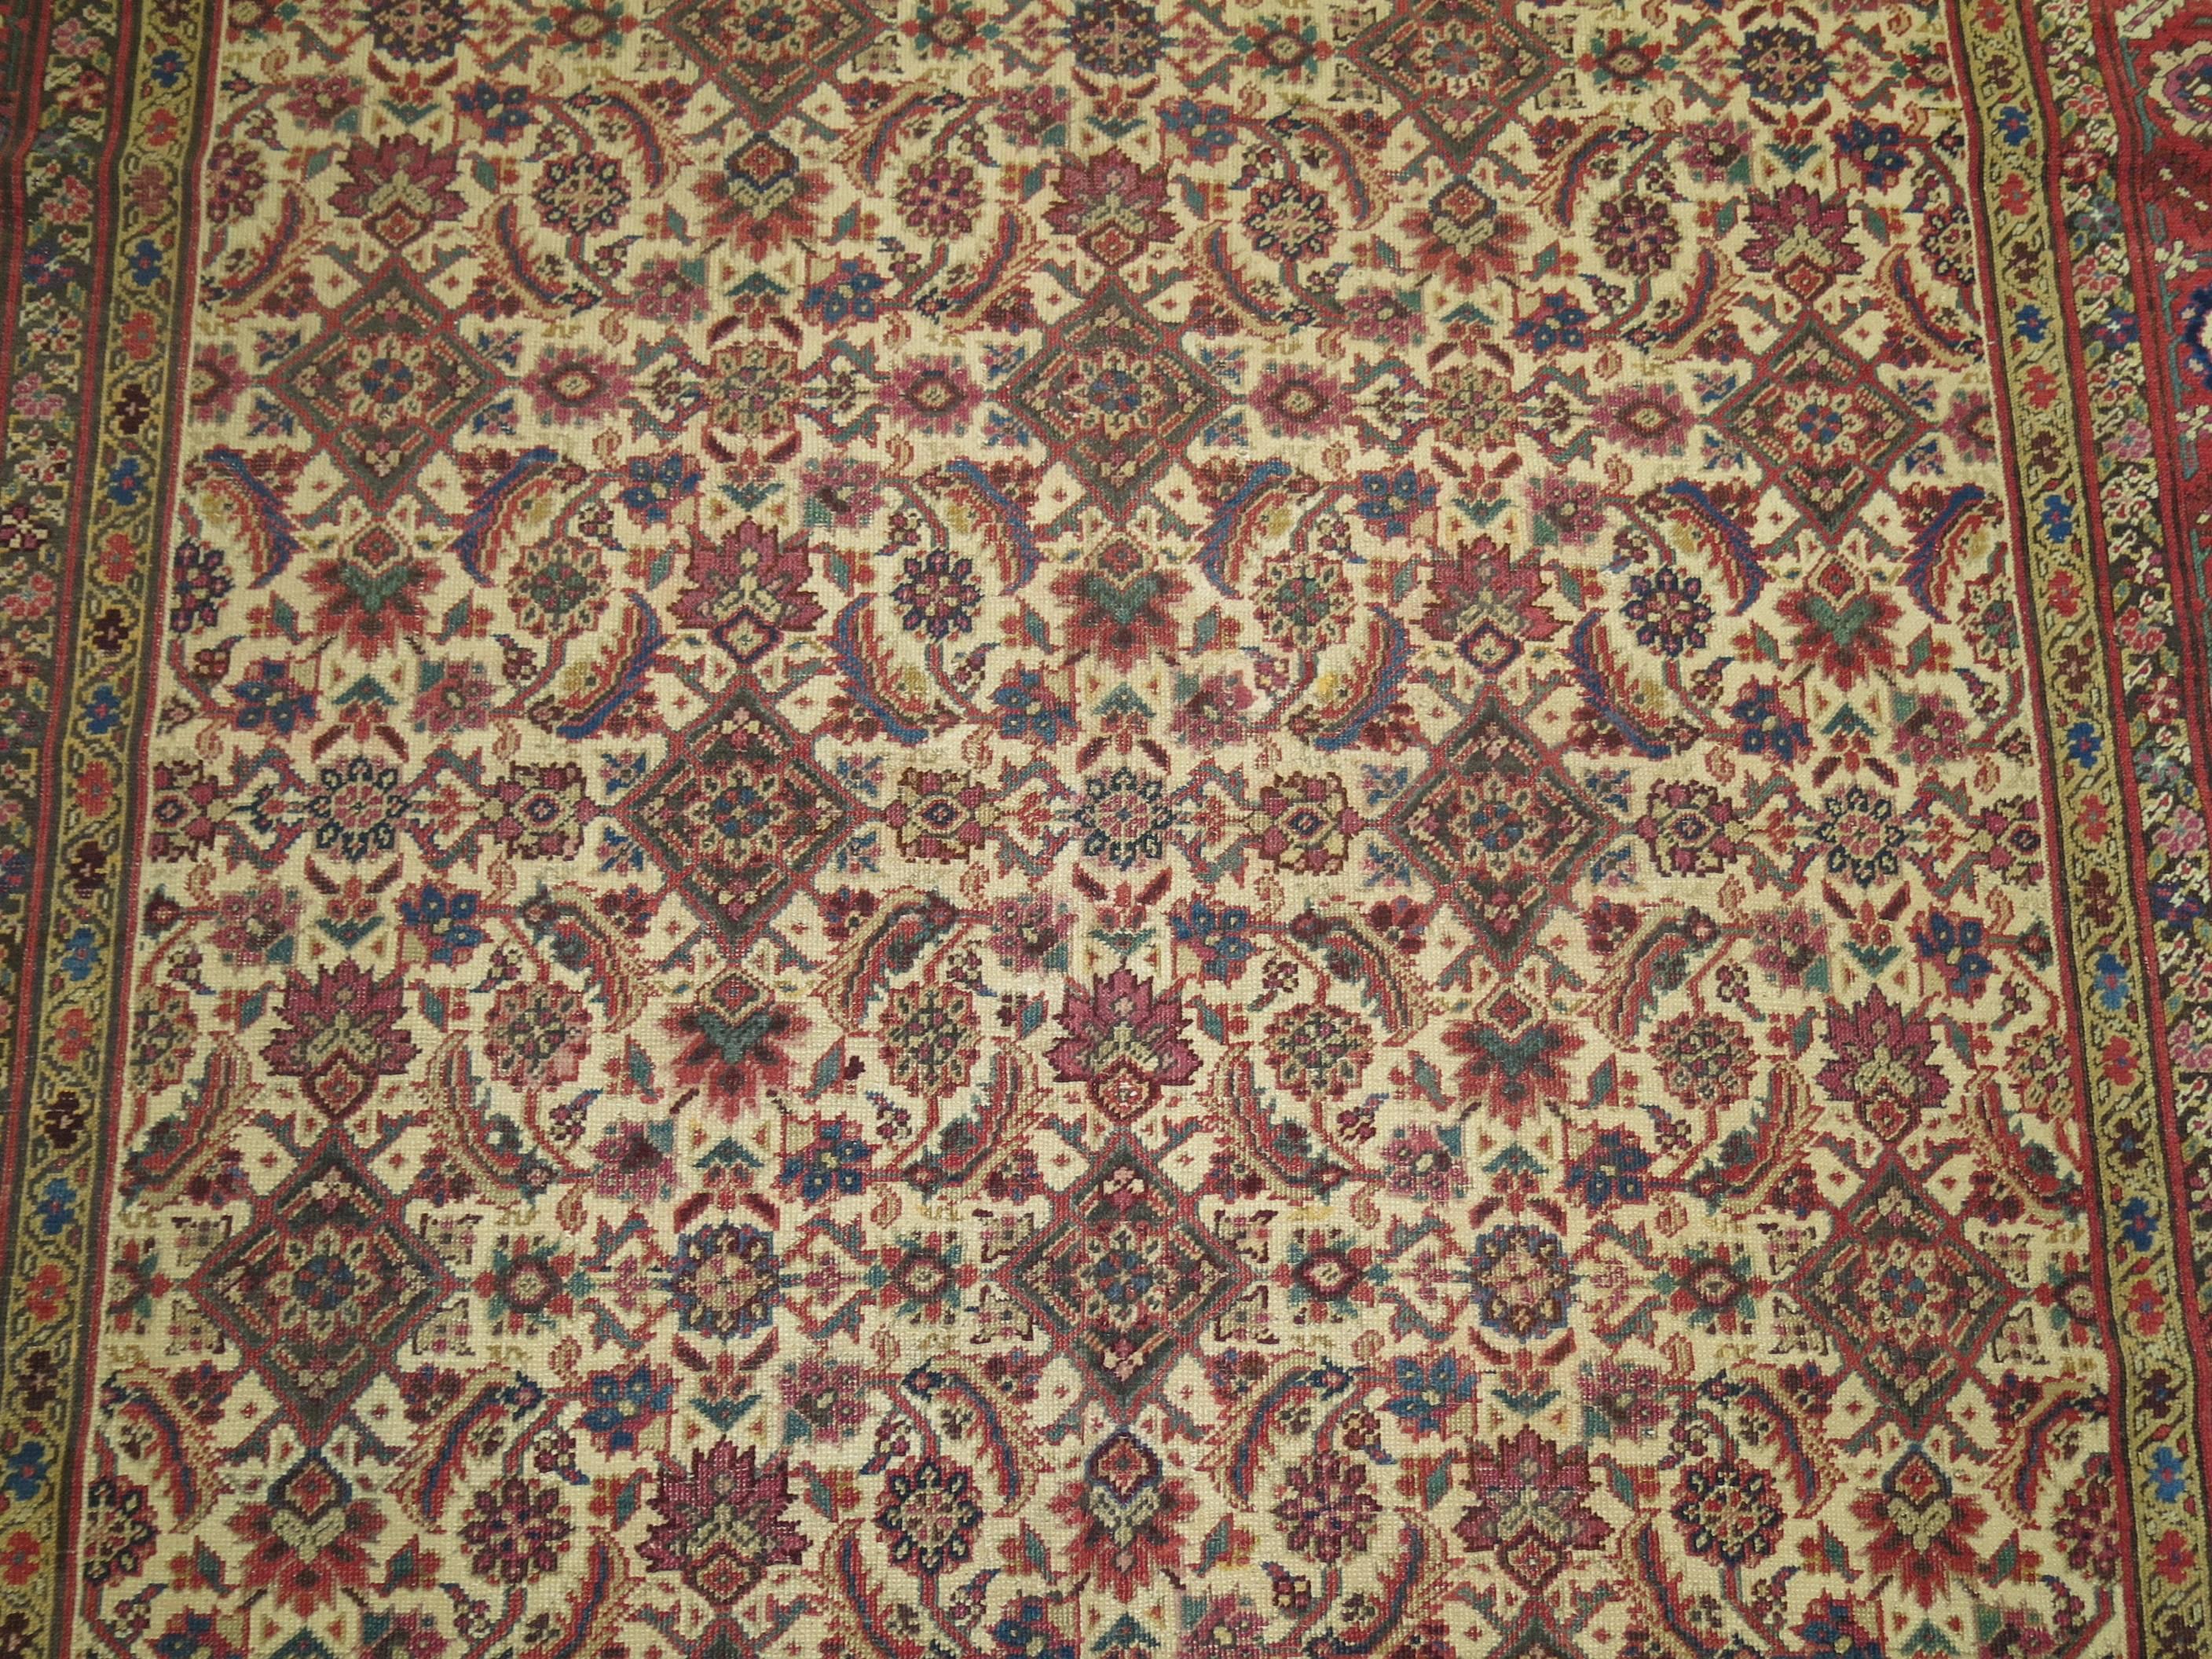 Emboldened by a symphonic palette of rarely found tones, this memorable 100-year-old gallery/corridor size antique Persian carpet from the prized Bakshaish weaving tradition demonstrates an irrepressibly energetic artistry. A riveting symphony of